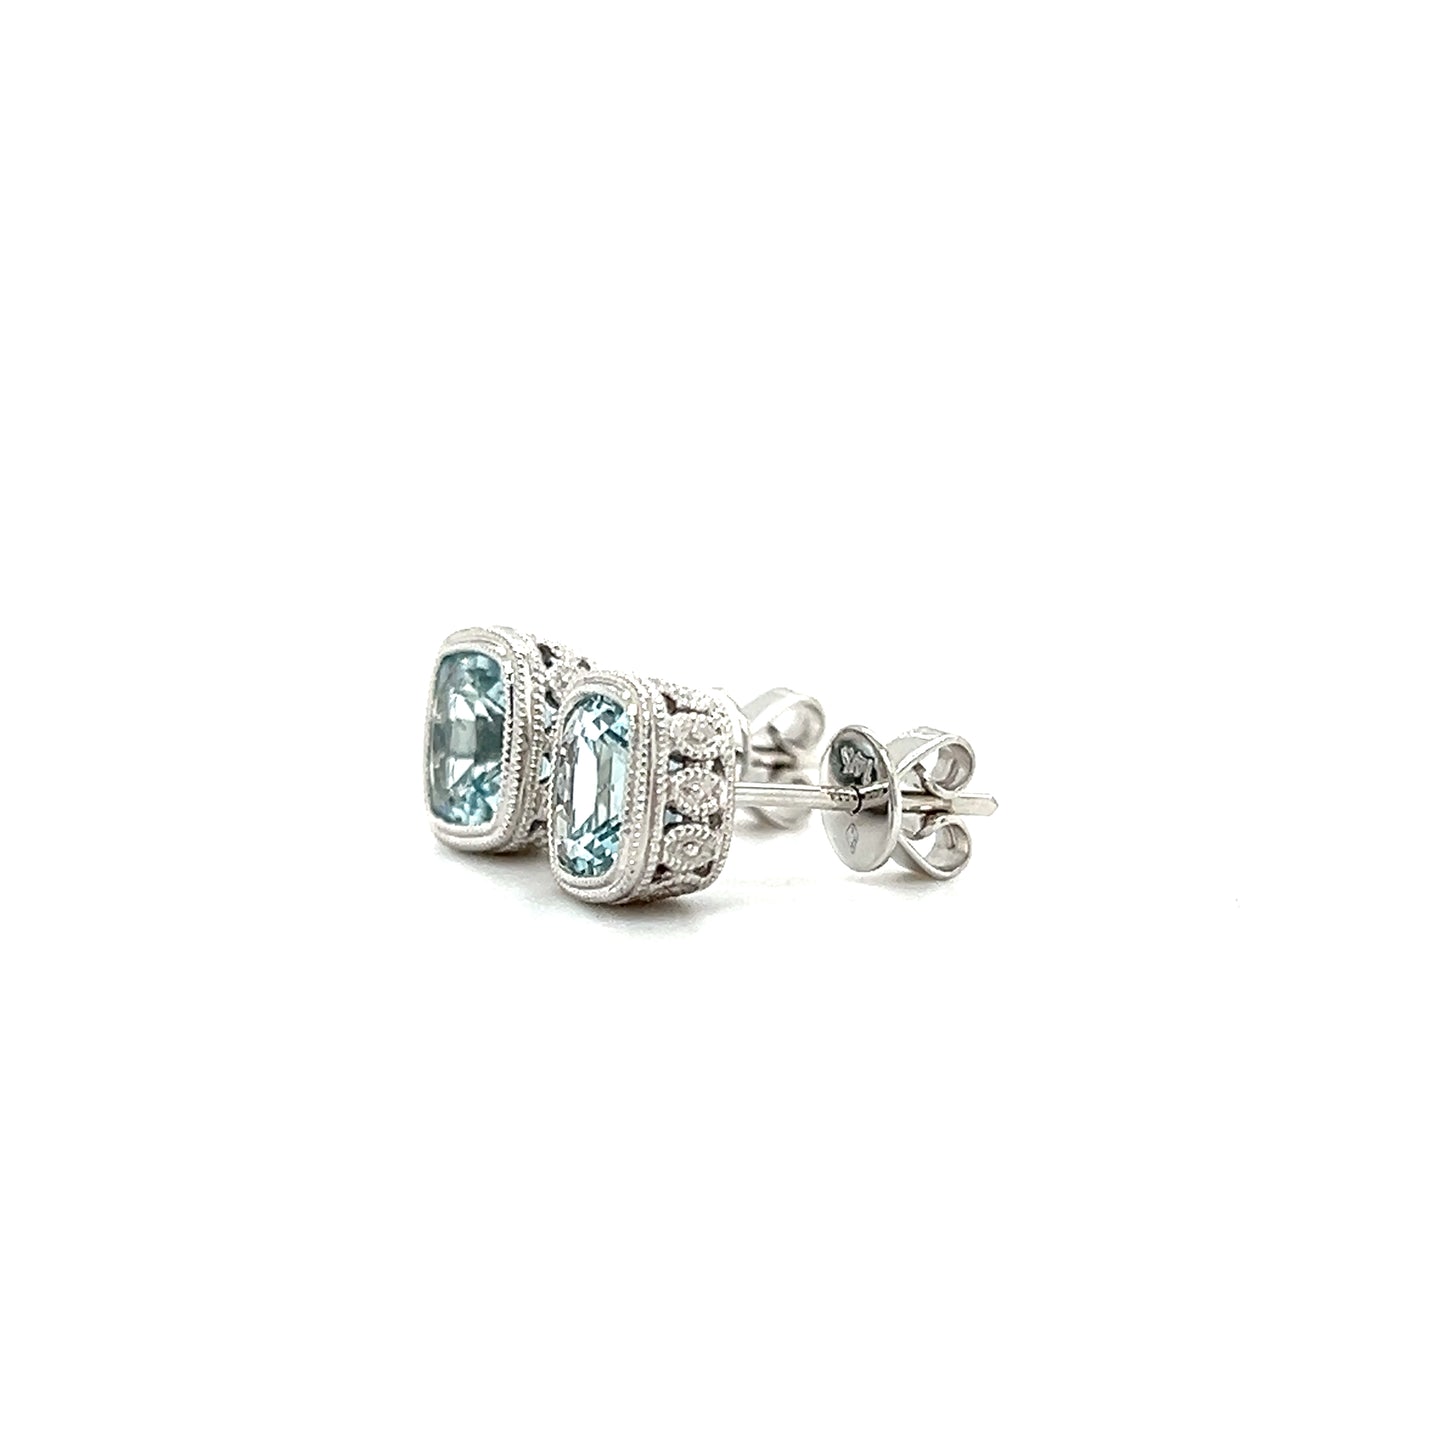   Aquamarine Stud Earrings with Milgrain and Filigree Details in 14K White Gold Right Side View